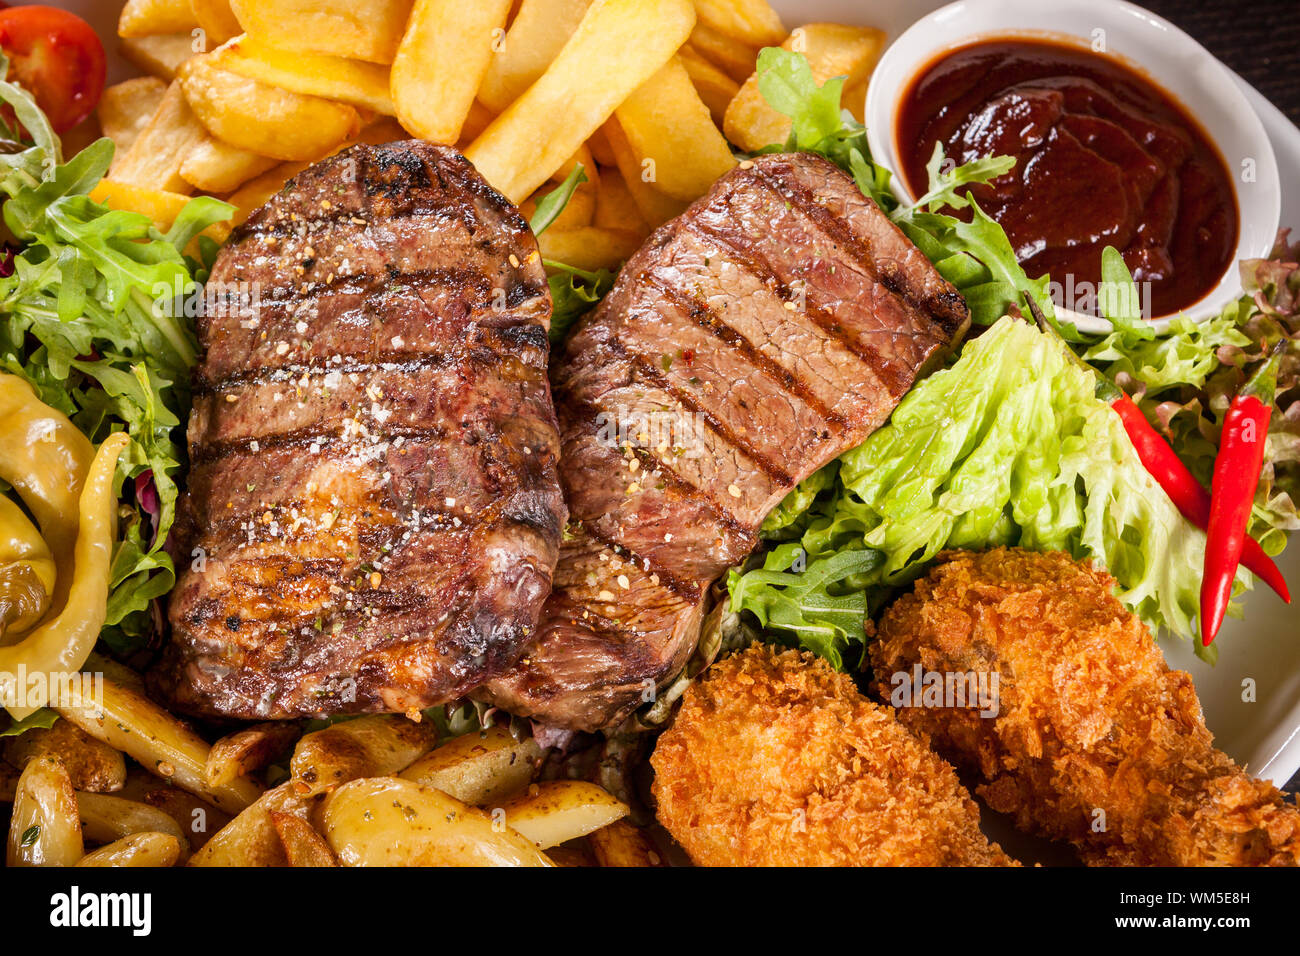 Platter of mixed meats, salad and French fries Stock Photo